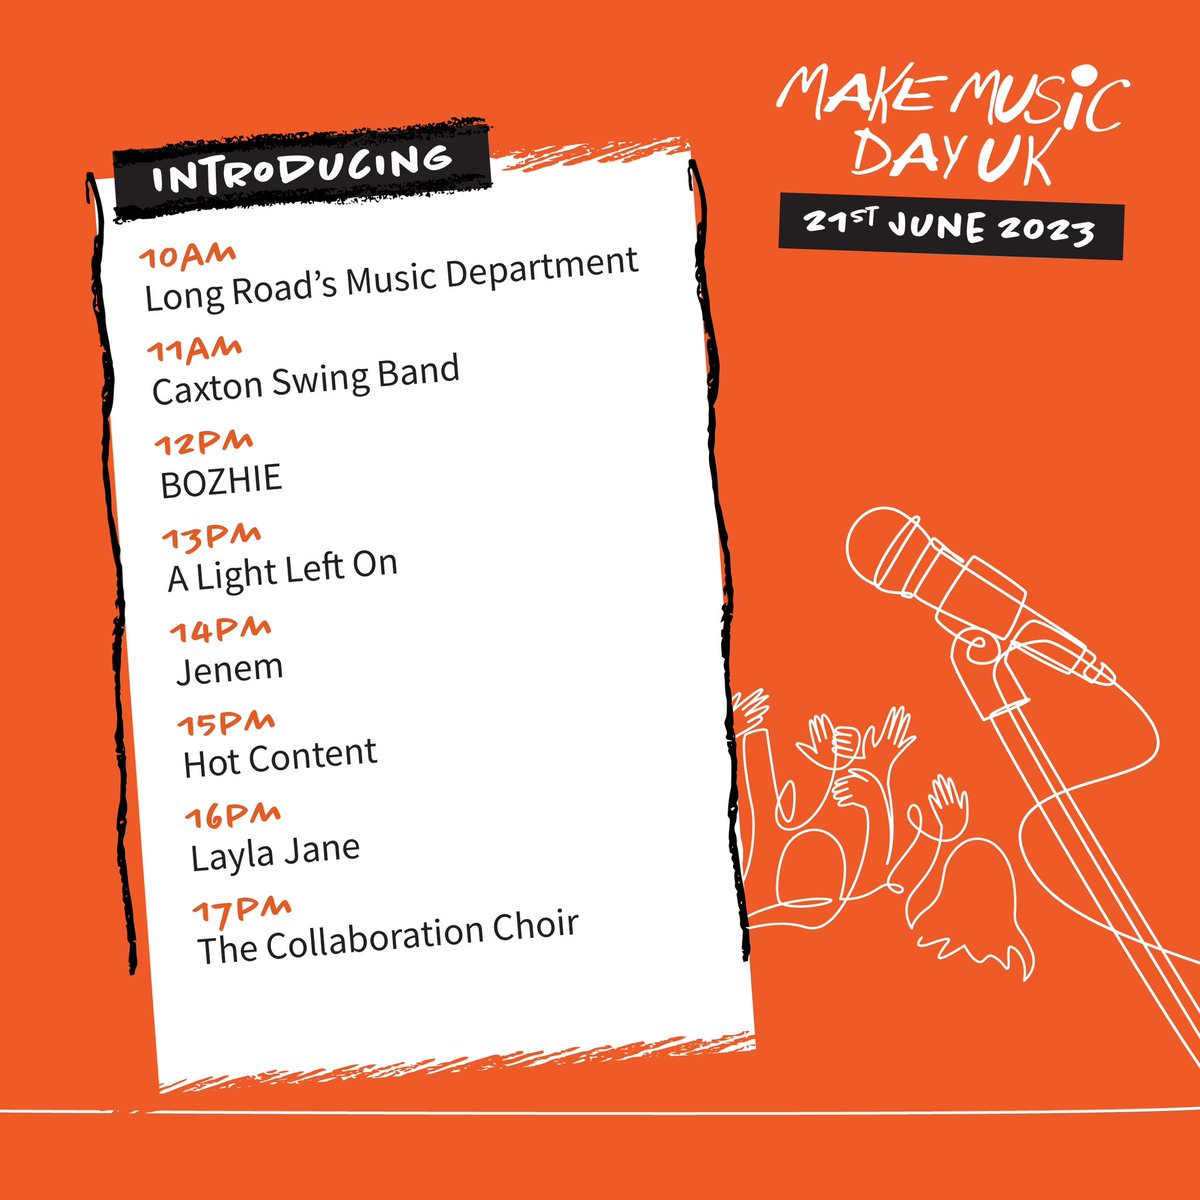 Look out for us on #makemusicday next month performing outside #cambridge #station - It’s gonna be epic! 🎶 @LoveCambridge_